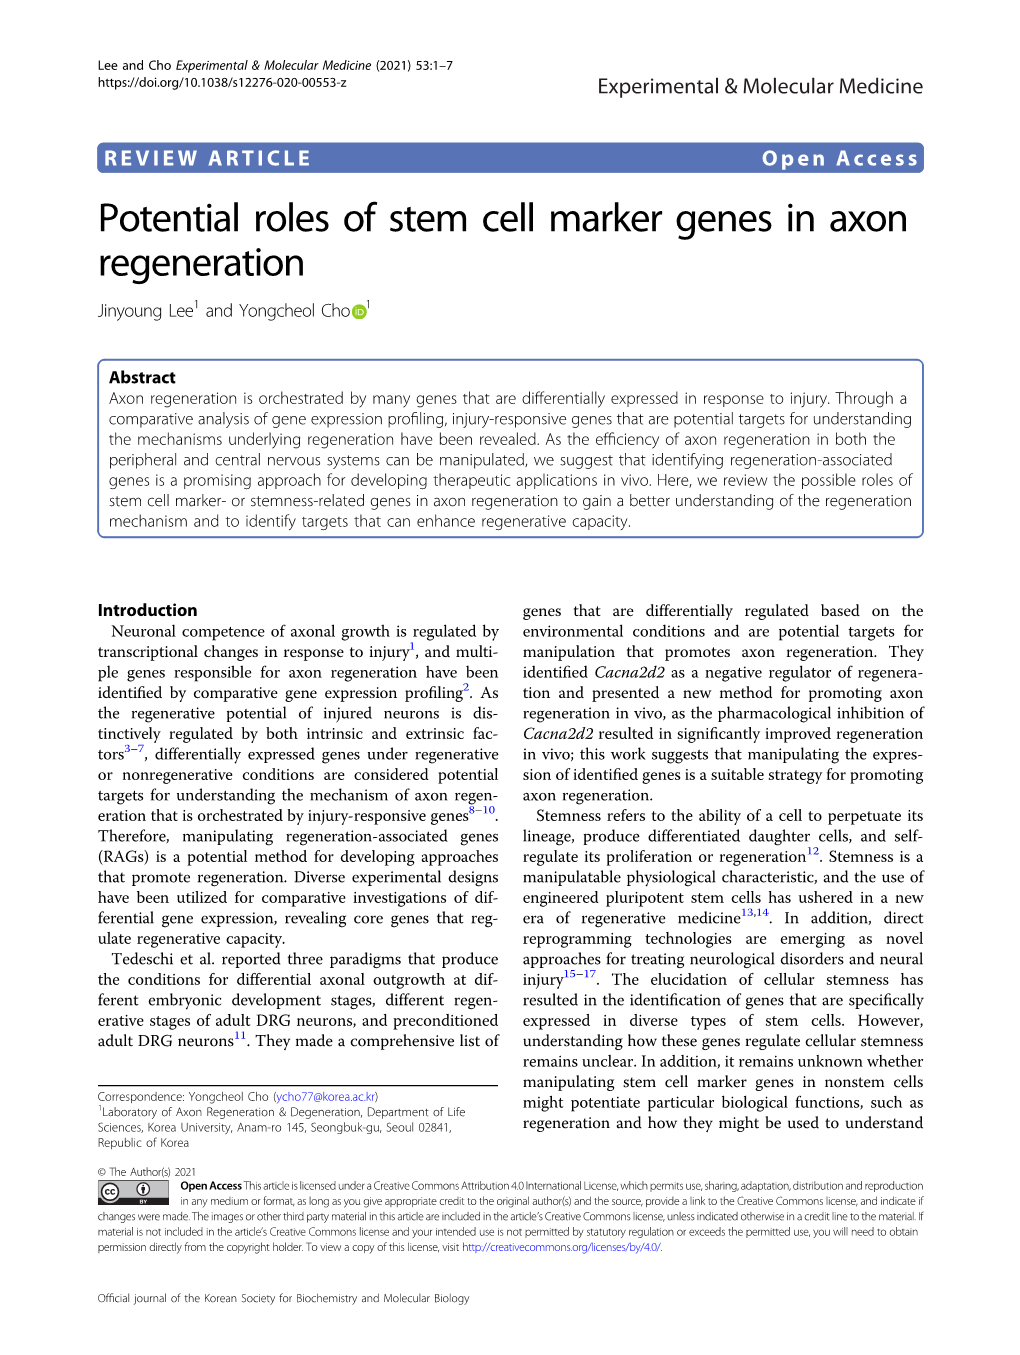 Potential Roles of Stem Cell Marker Genes in Axon Regeneration Jinyoung Lee1 and Yongcheol Cho 1